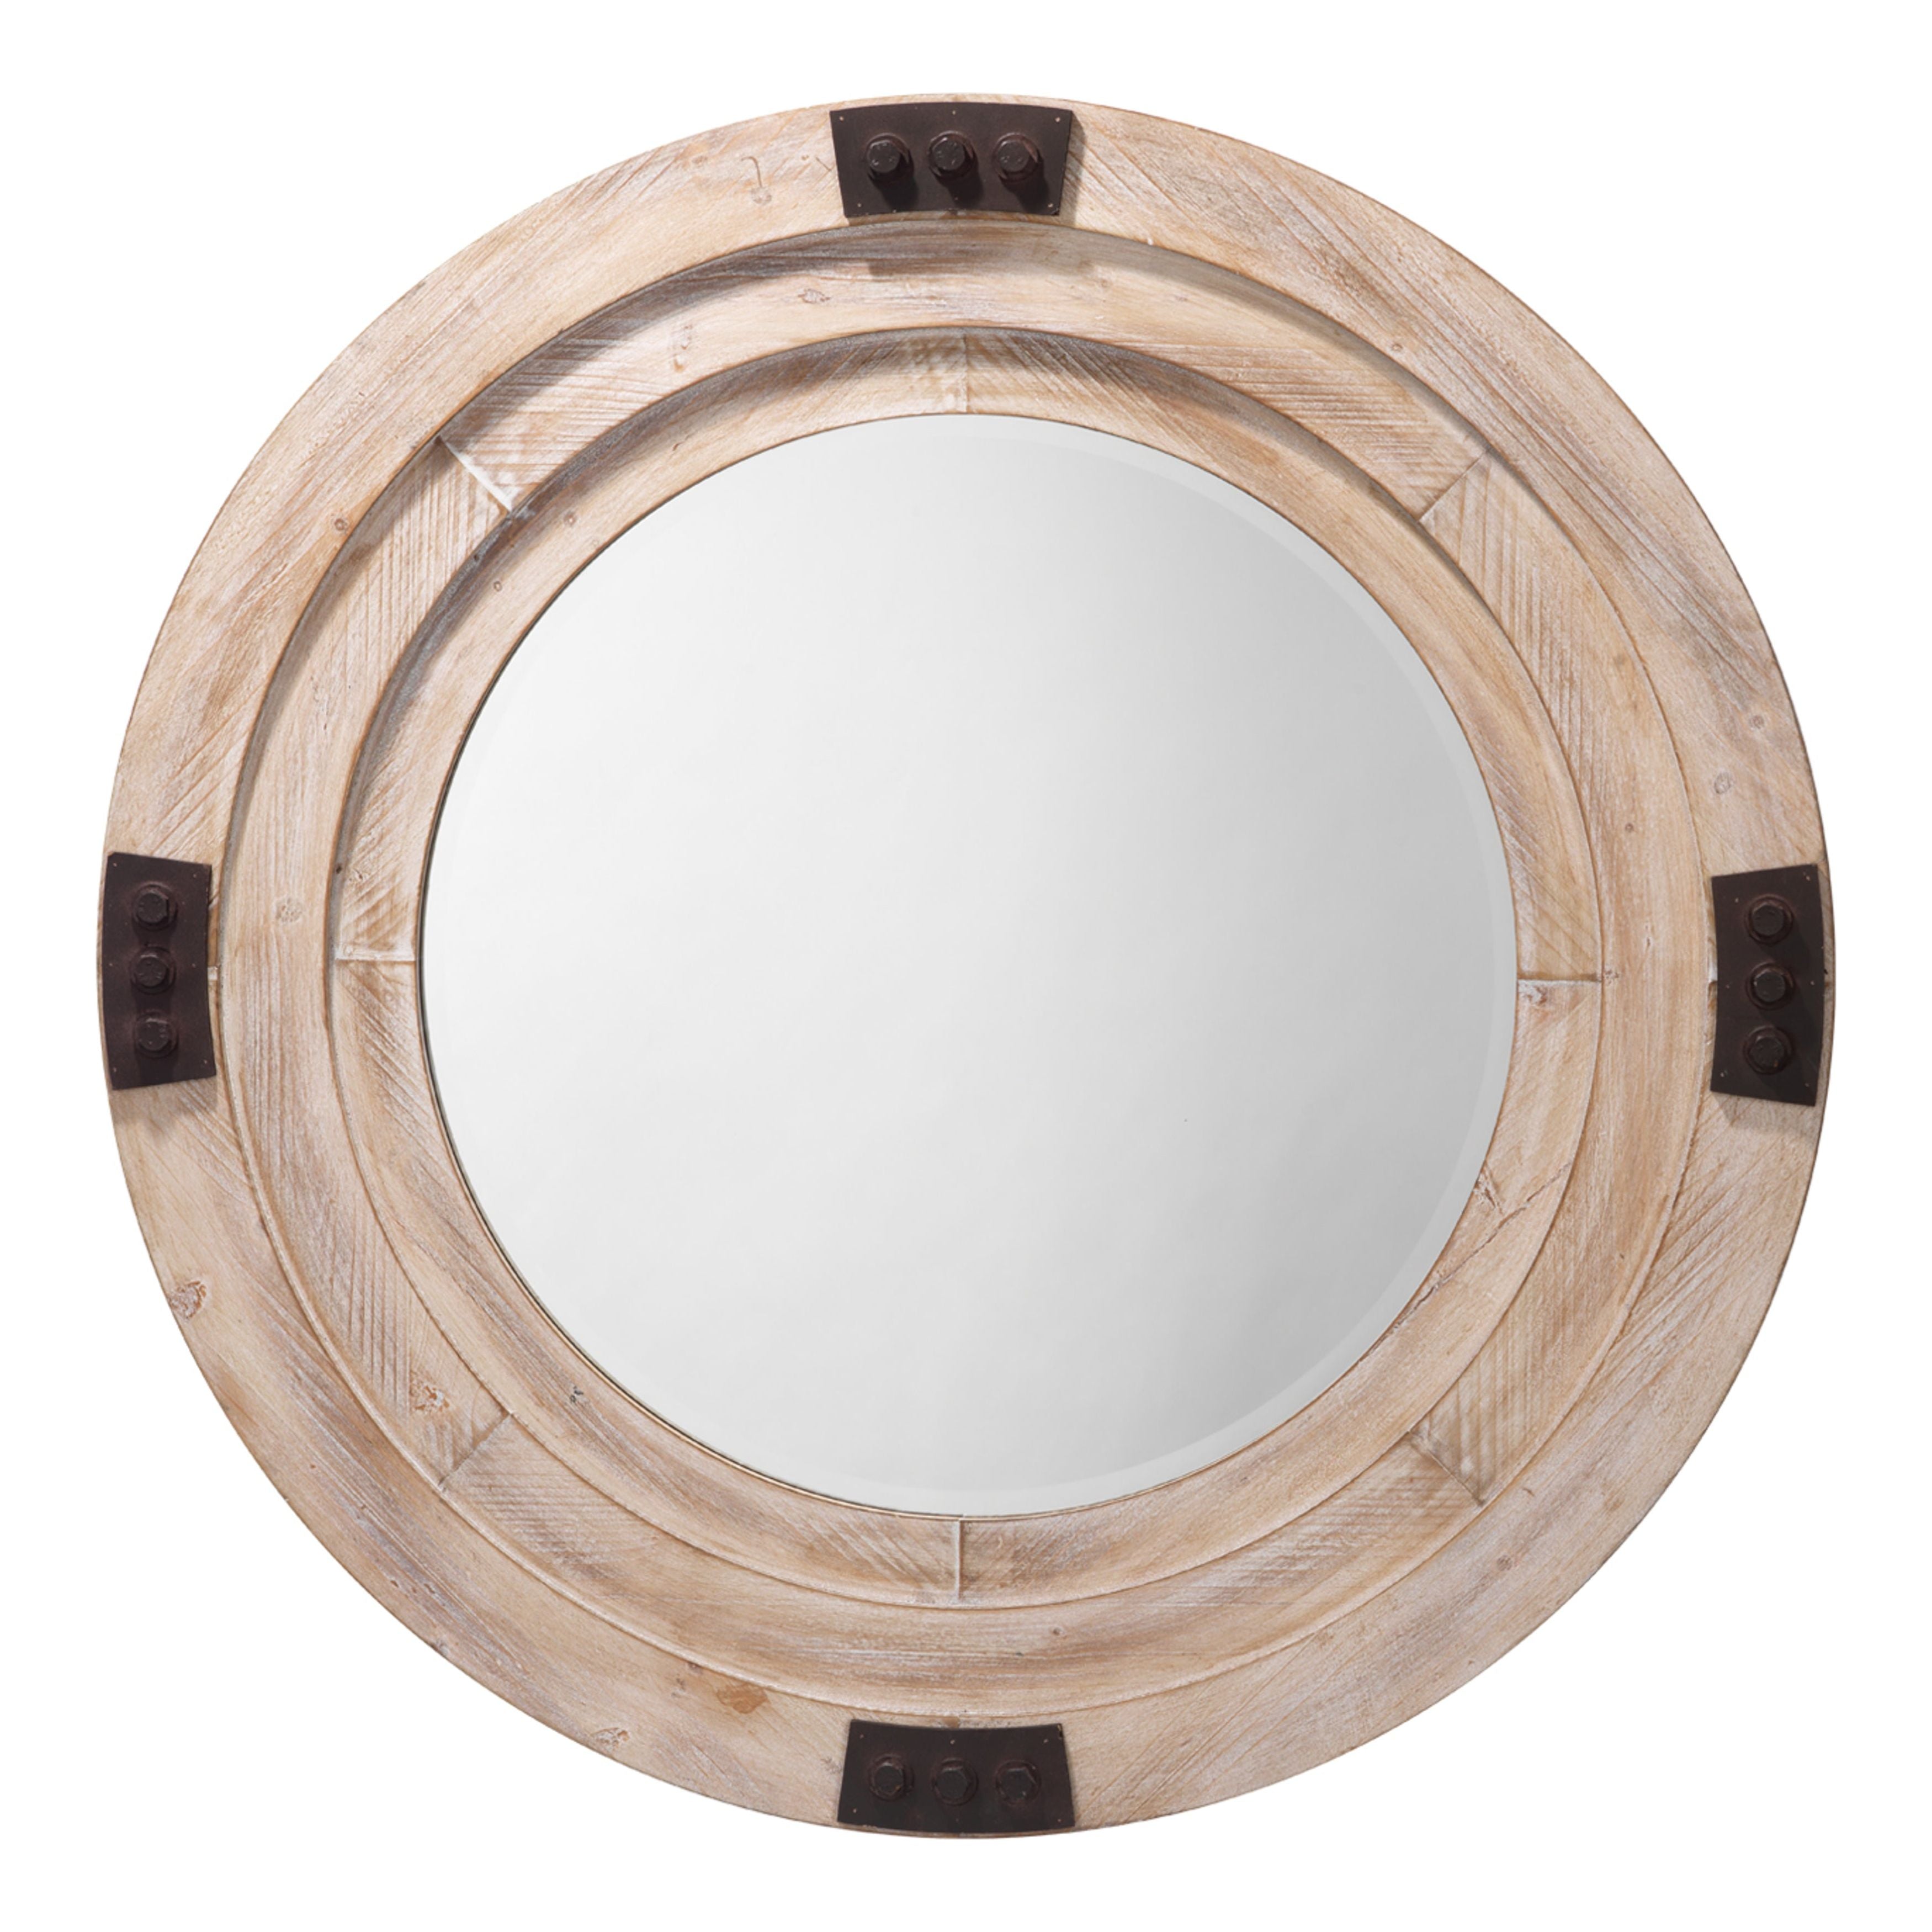 Jamie Young Company - BL616-M3 - Foreman Mirror -  - Grey Washed